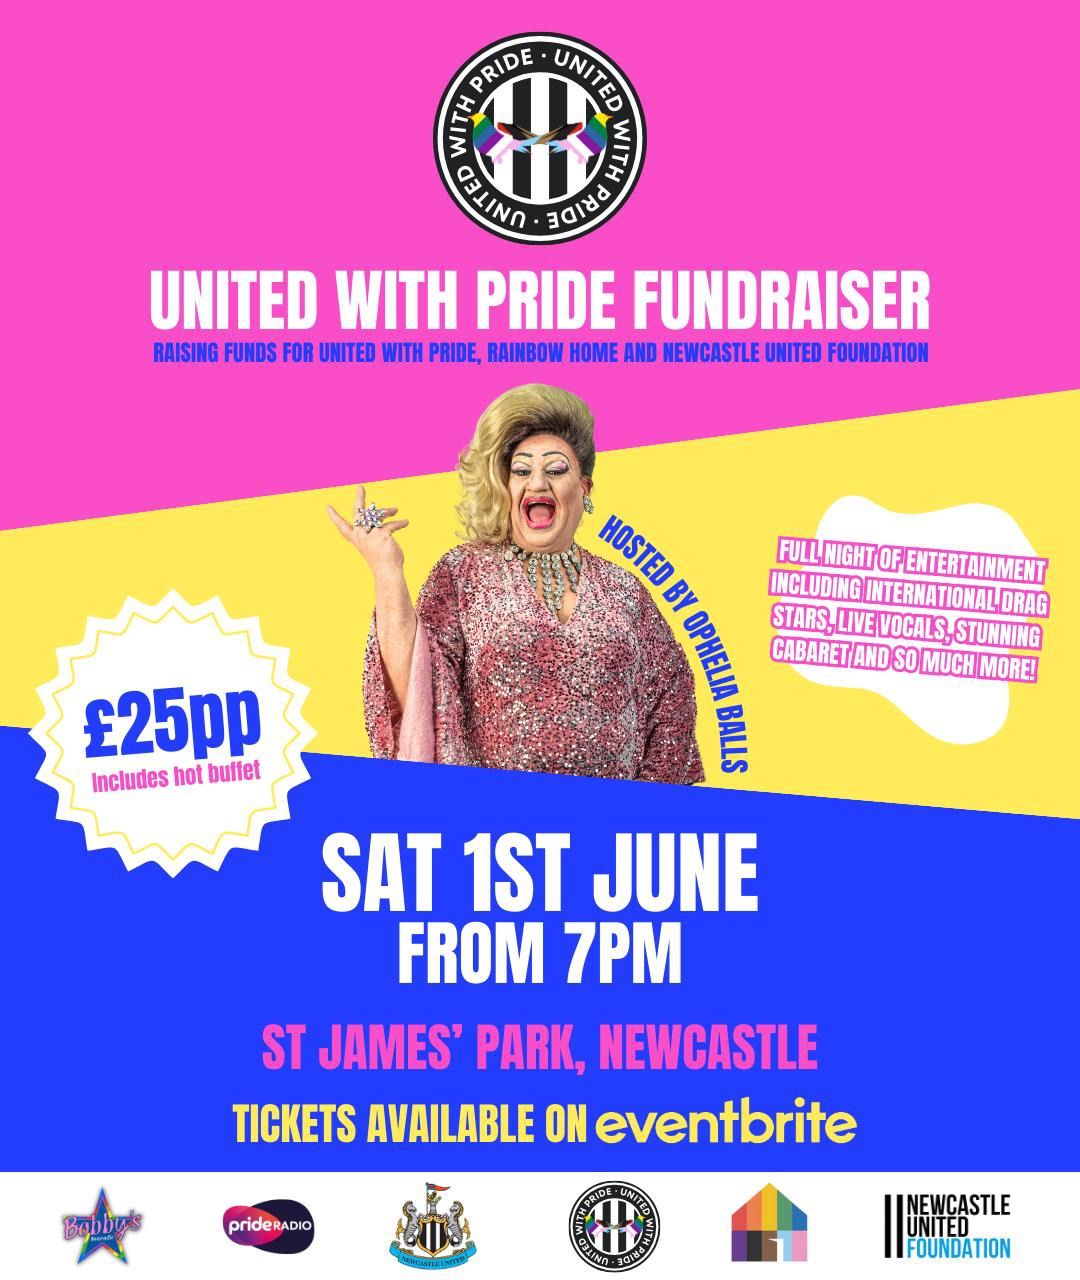 United With Pride Fundraiser at St James' Park